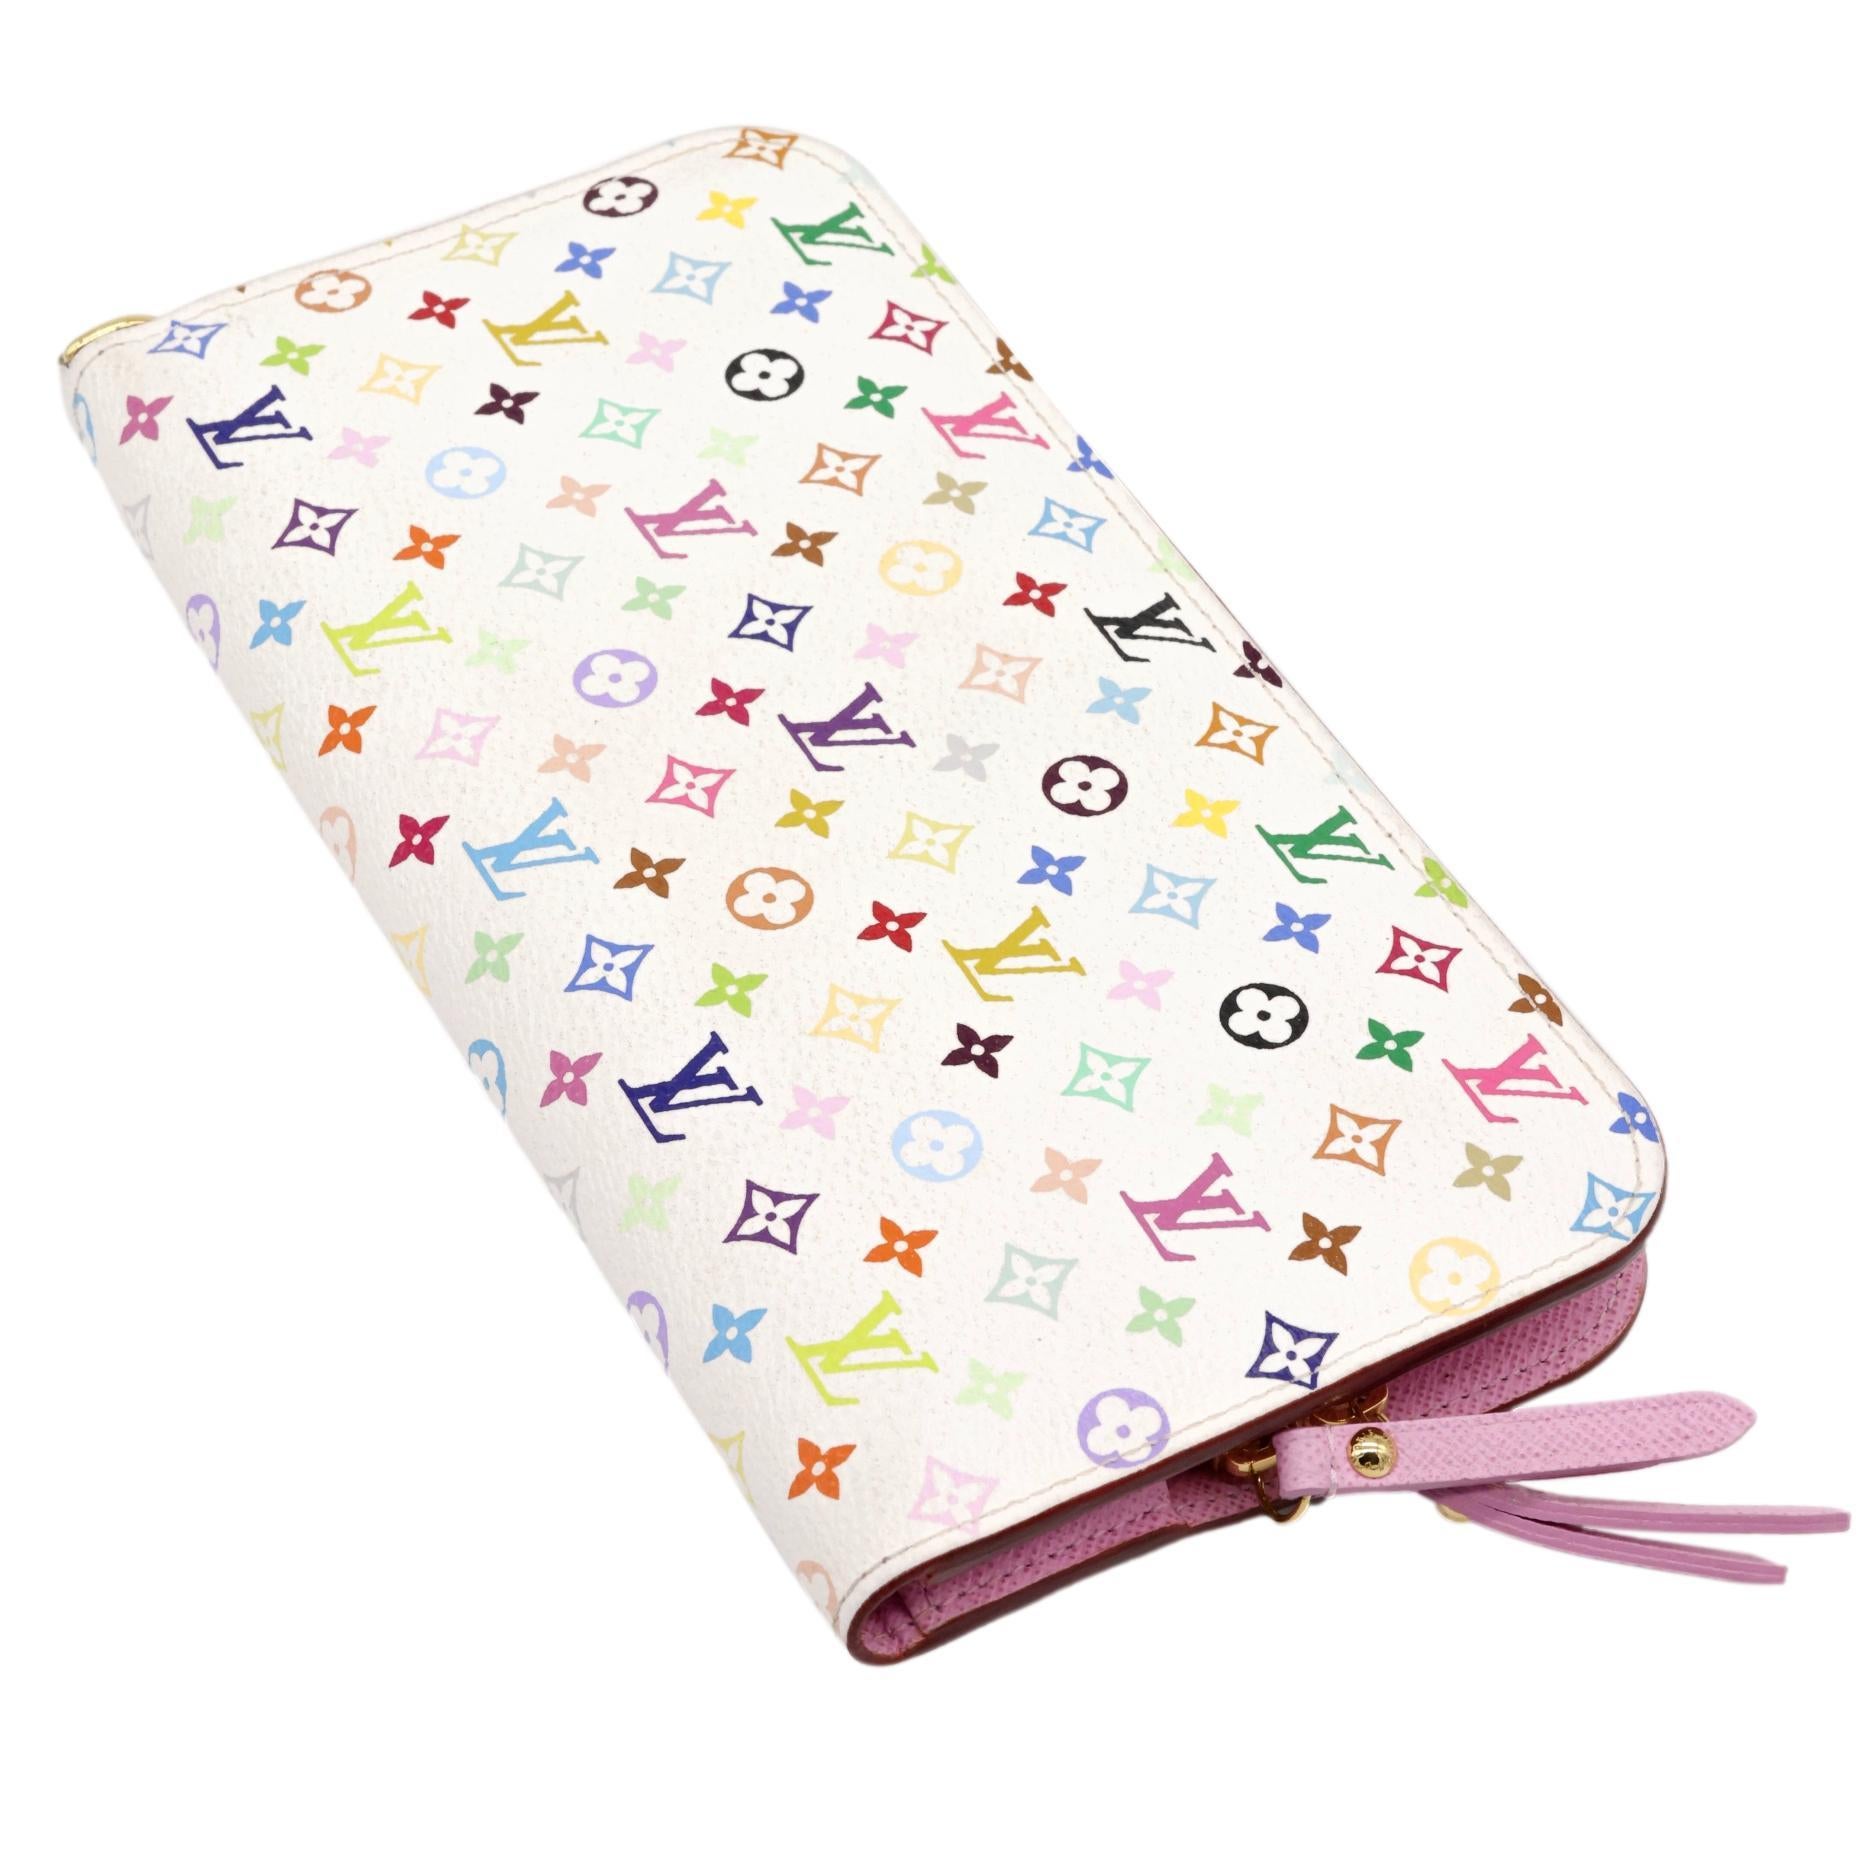 Louis Vuitton x Murakami Limited Edition Monogram Multicolor Insolite Wallet, 2003. This incredibly rare and highly sought after piece of Louis Vuitton history became a worldwide phenomenon when Japanese artist Takashi Murakami teamed up with the